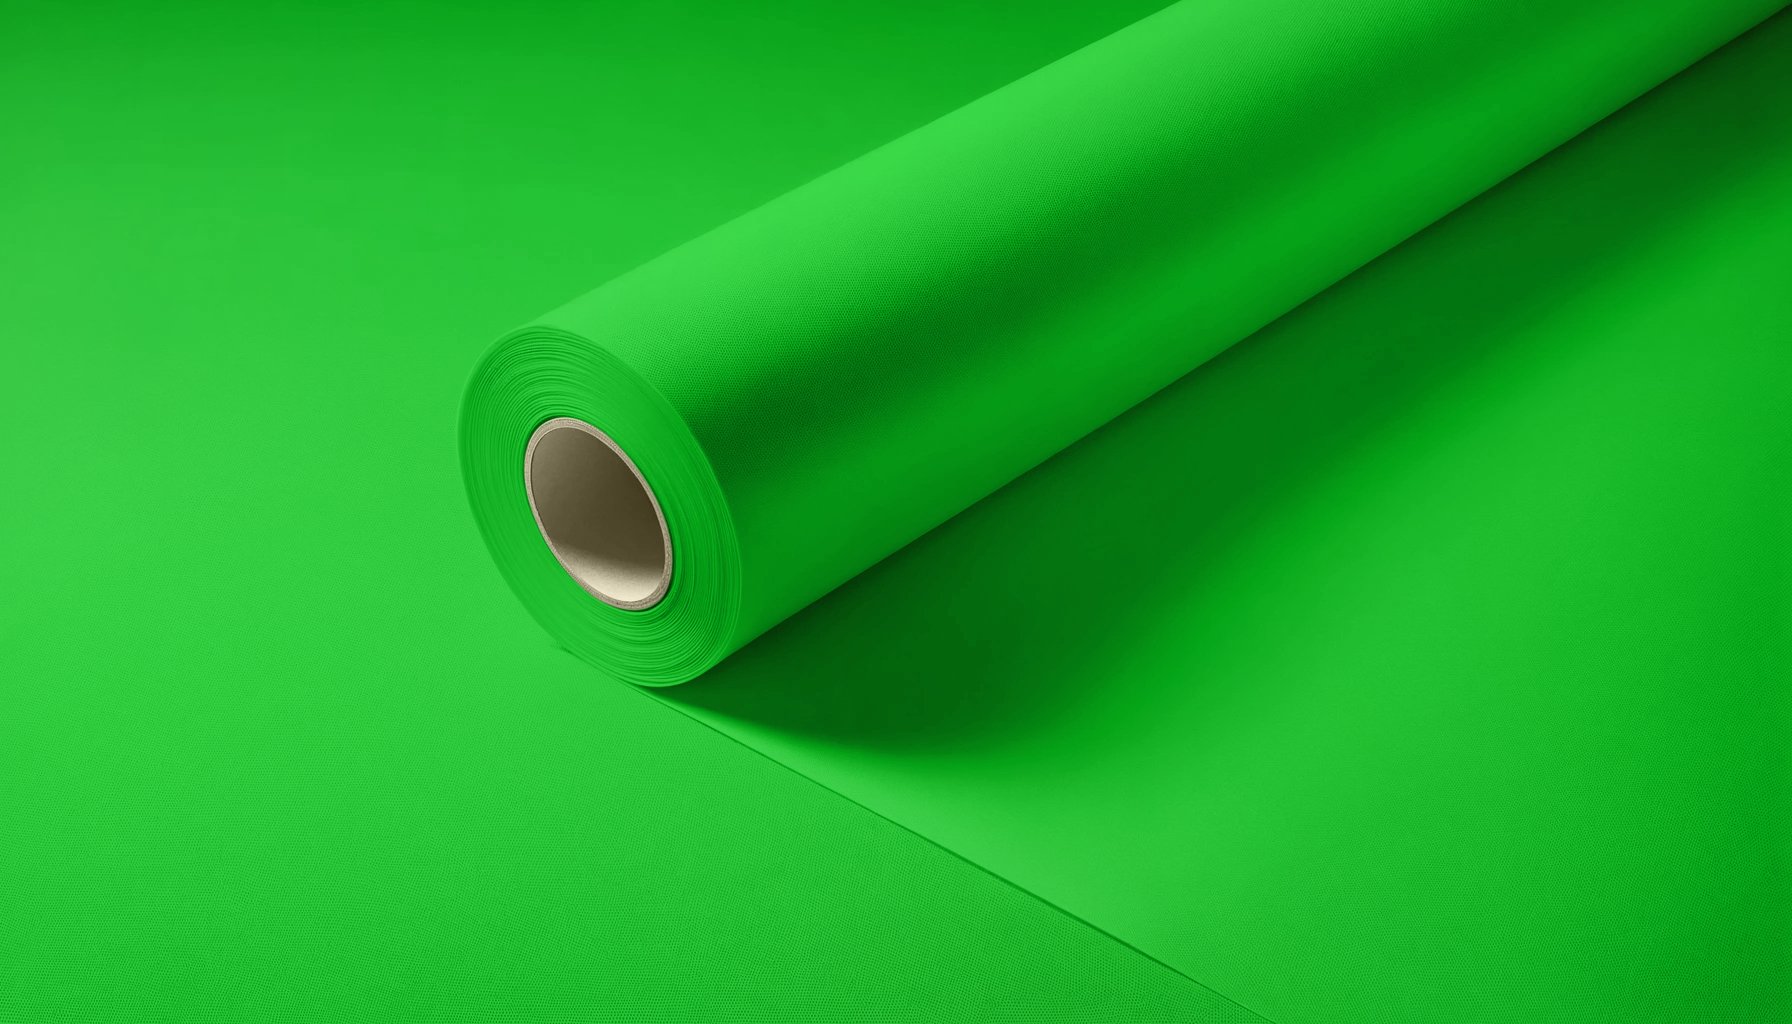 Peel & Stick Removable Re-usable Paint - Color RAL 6038 Luminous Green - offRAL™ - RALRAW LLC, USA